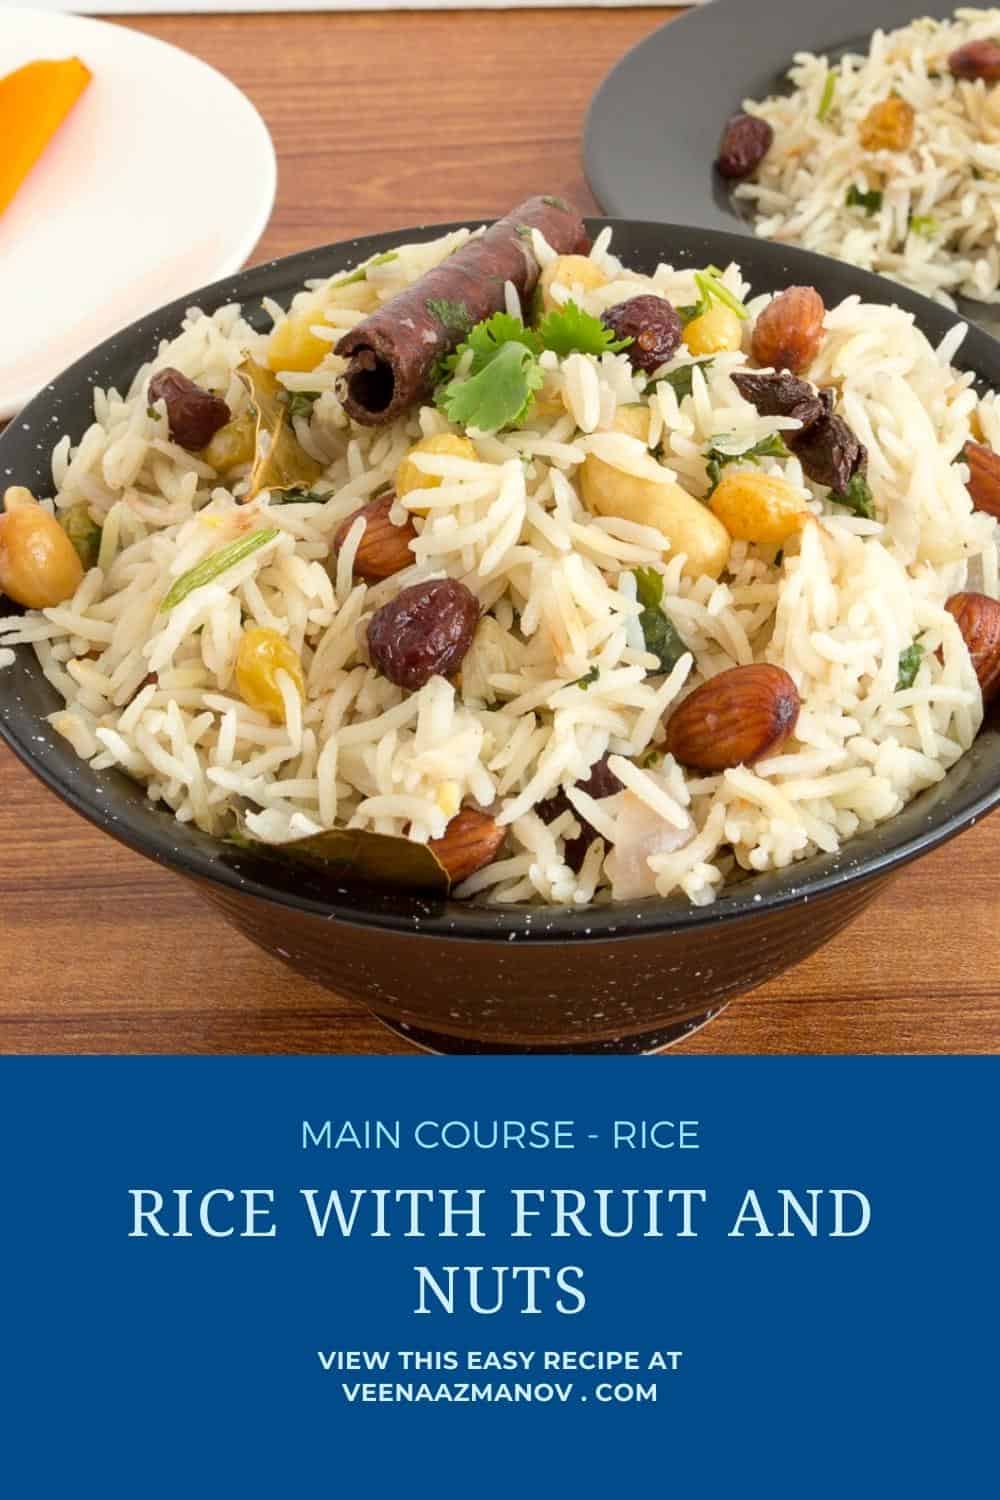 Pinterest image for rice pilaf with fruit and nuts.